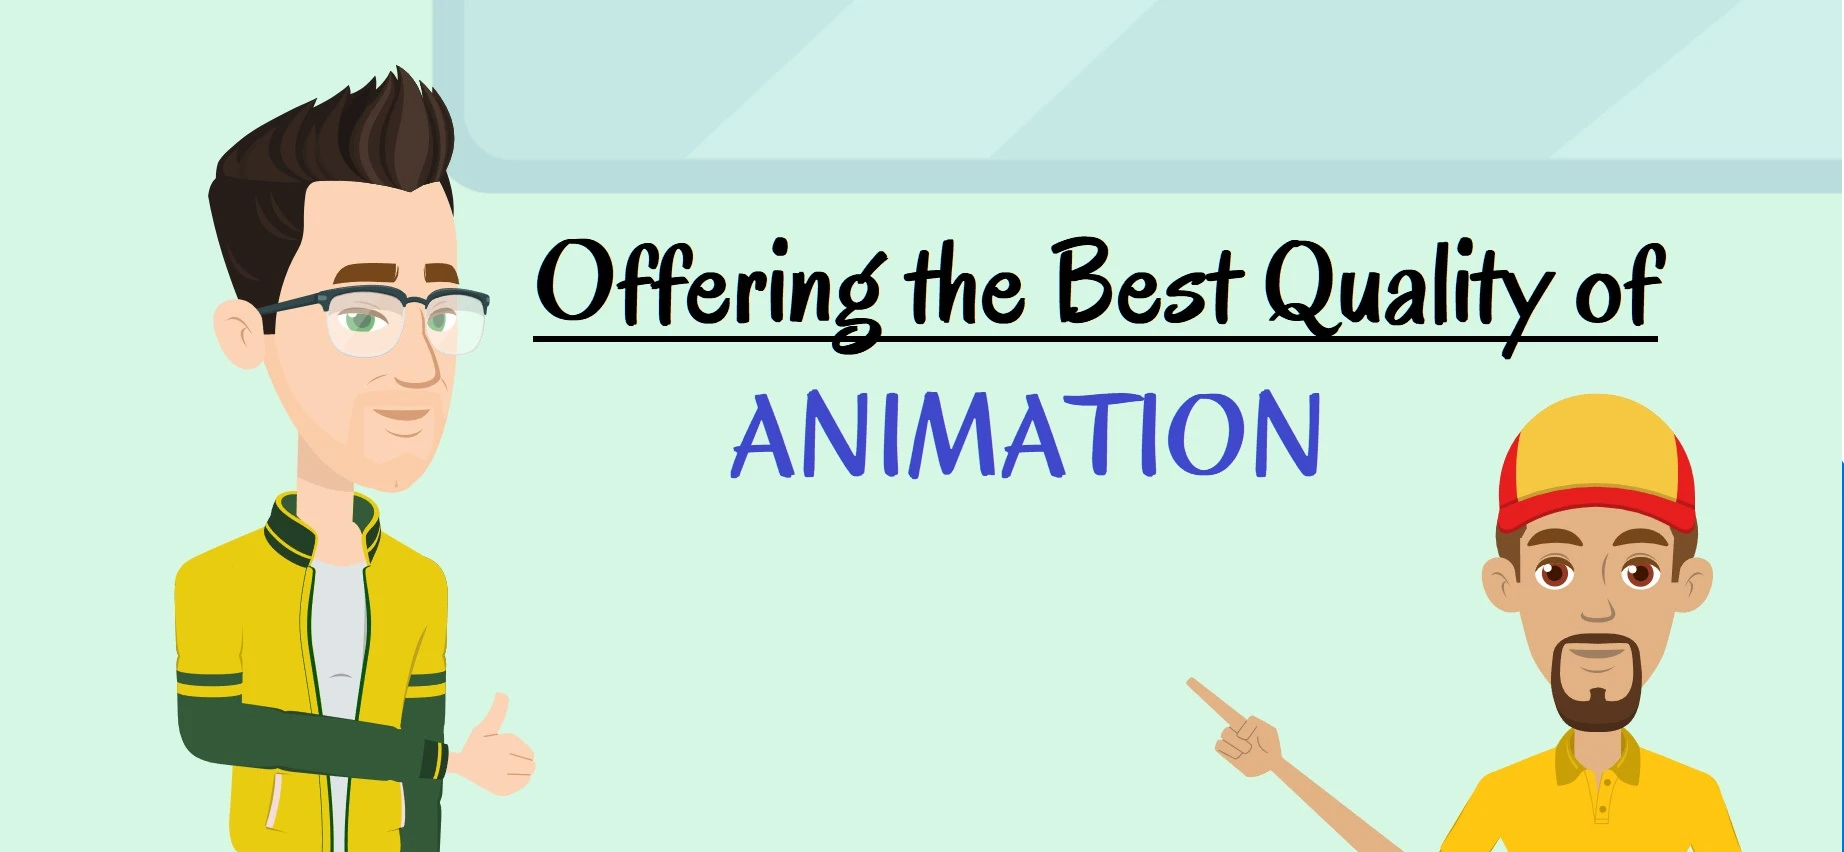 Get White Board Animating Video for $5 - SEOClerks